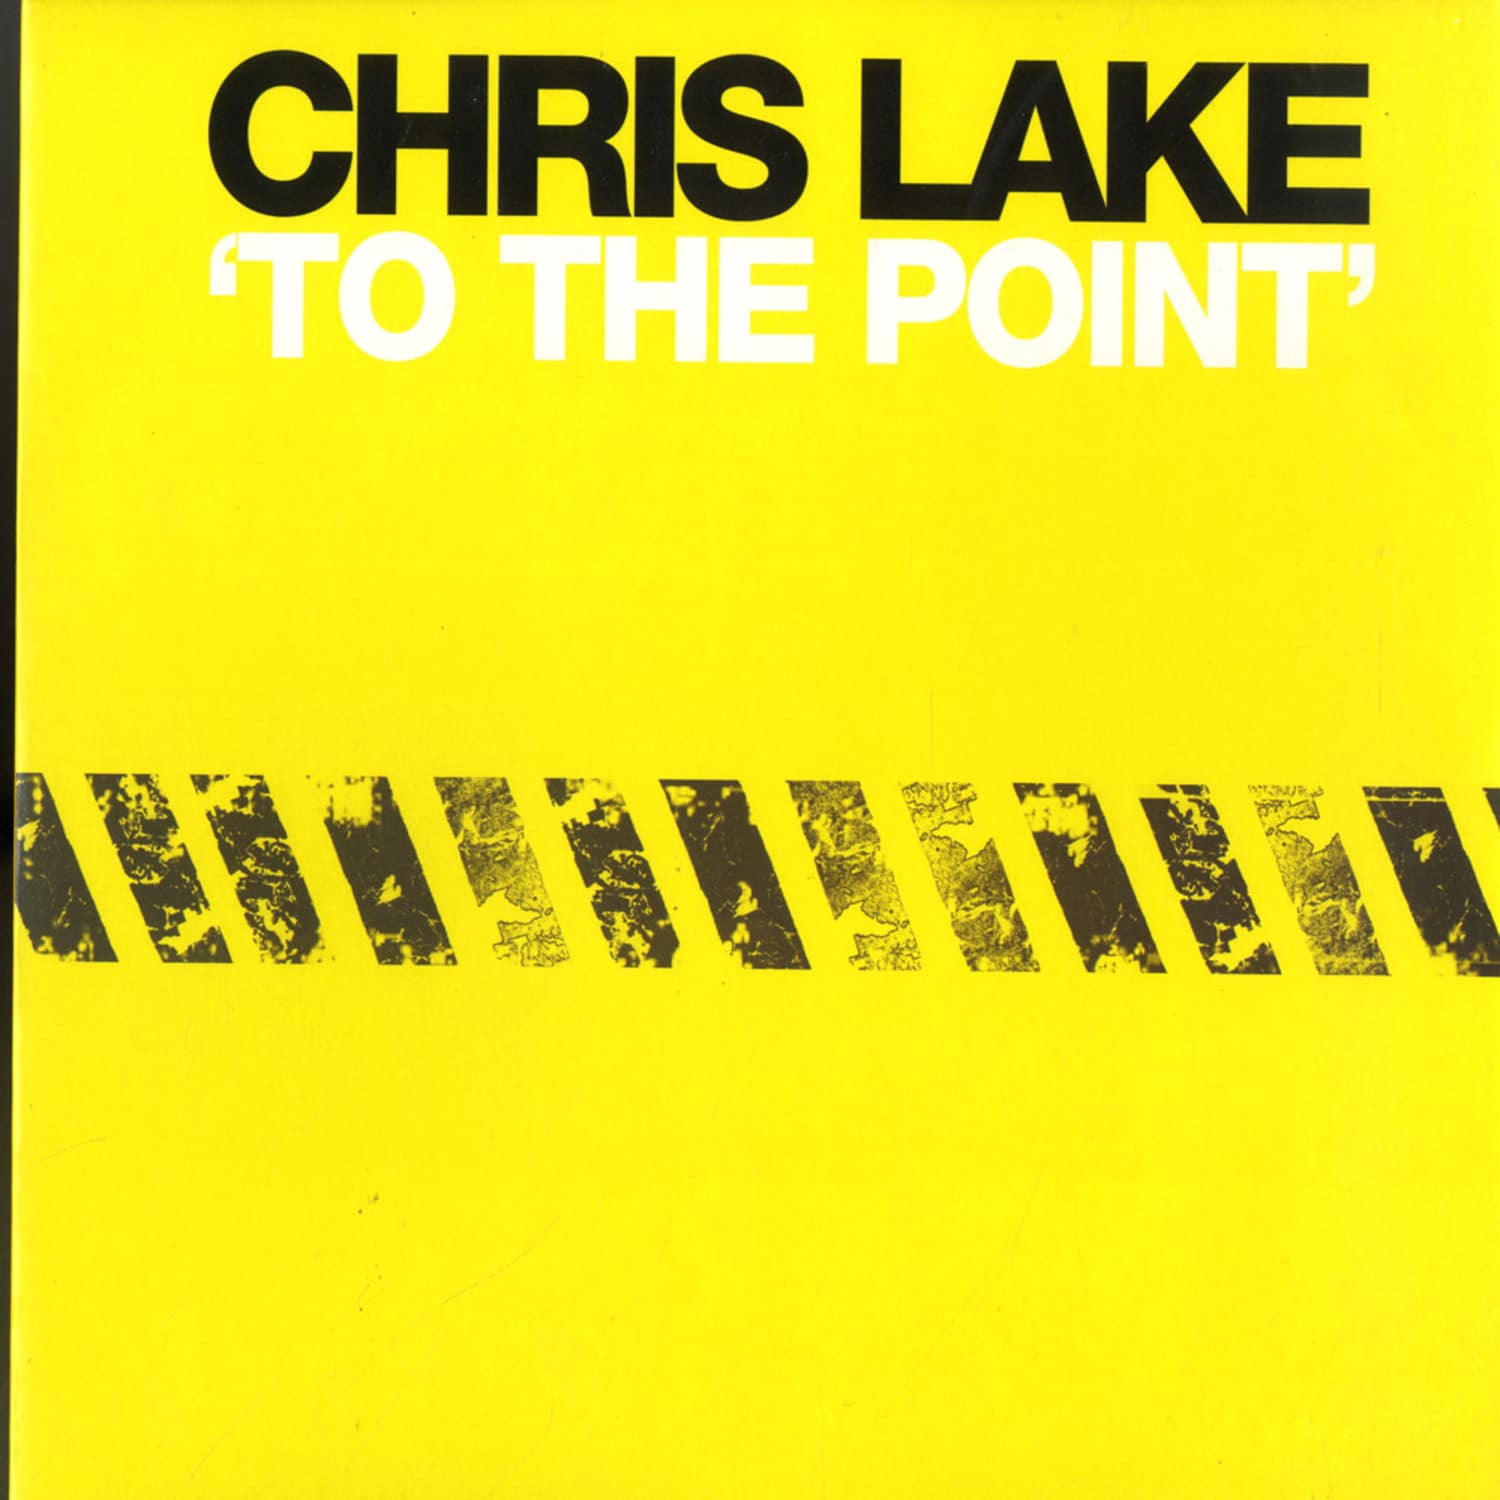 Chris Lake - TO THE POINT